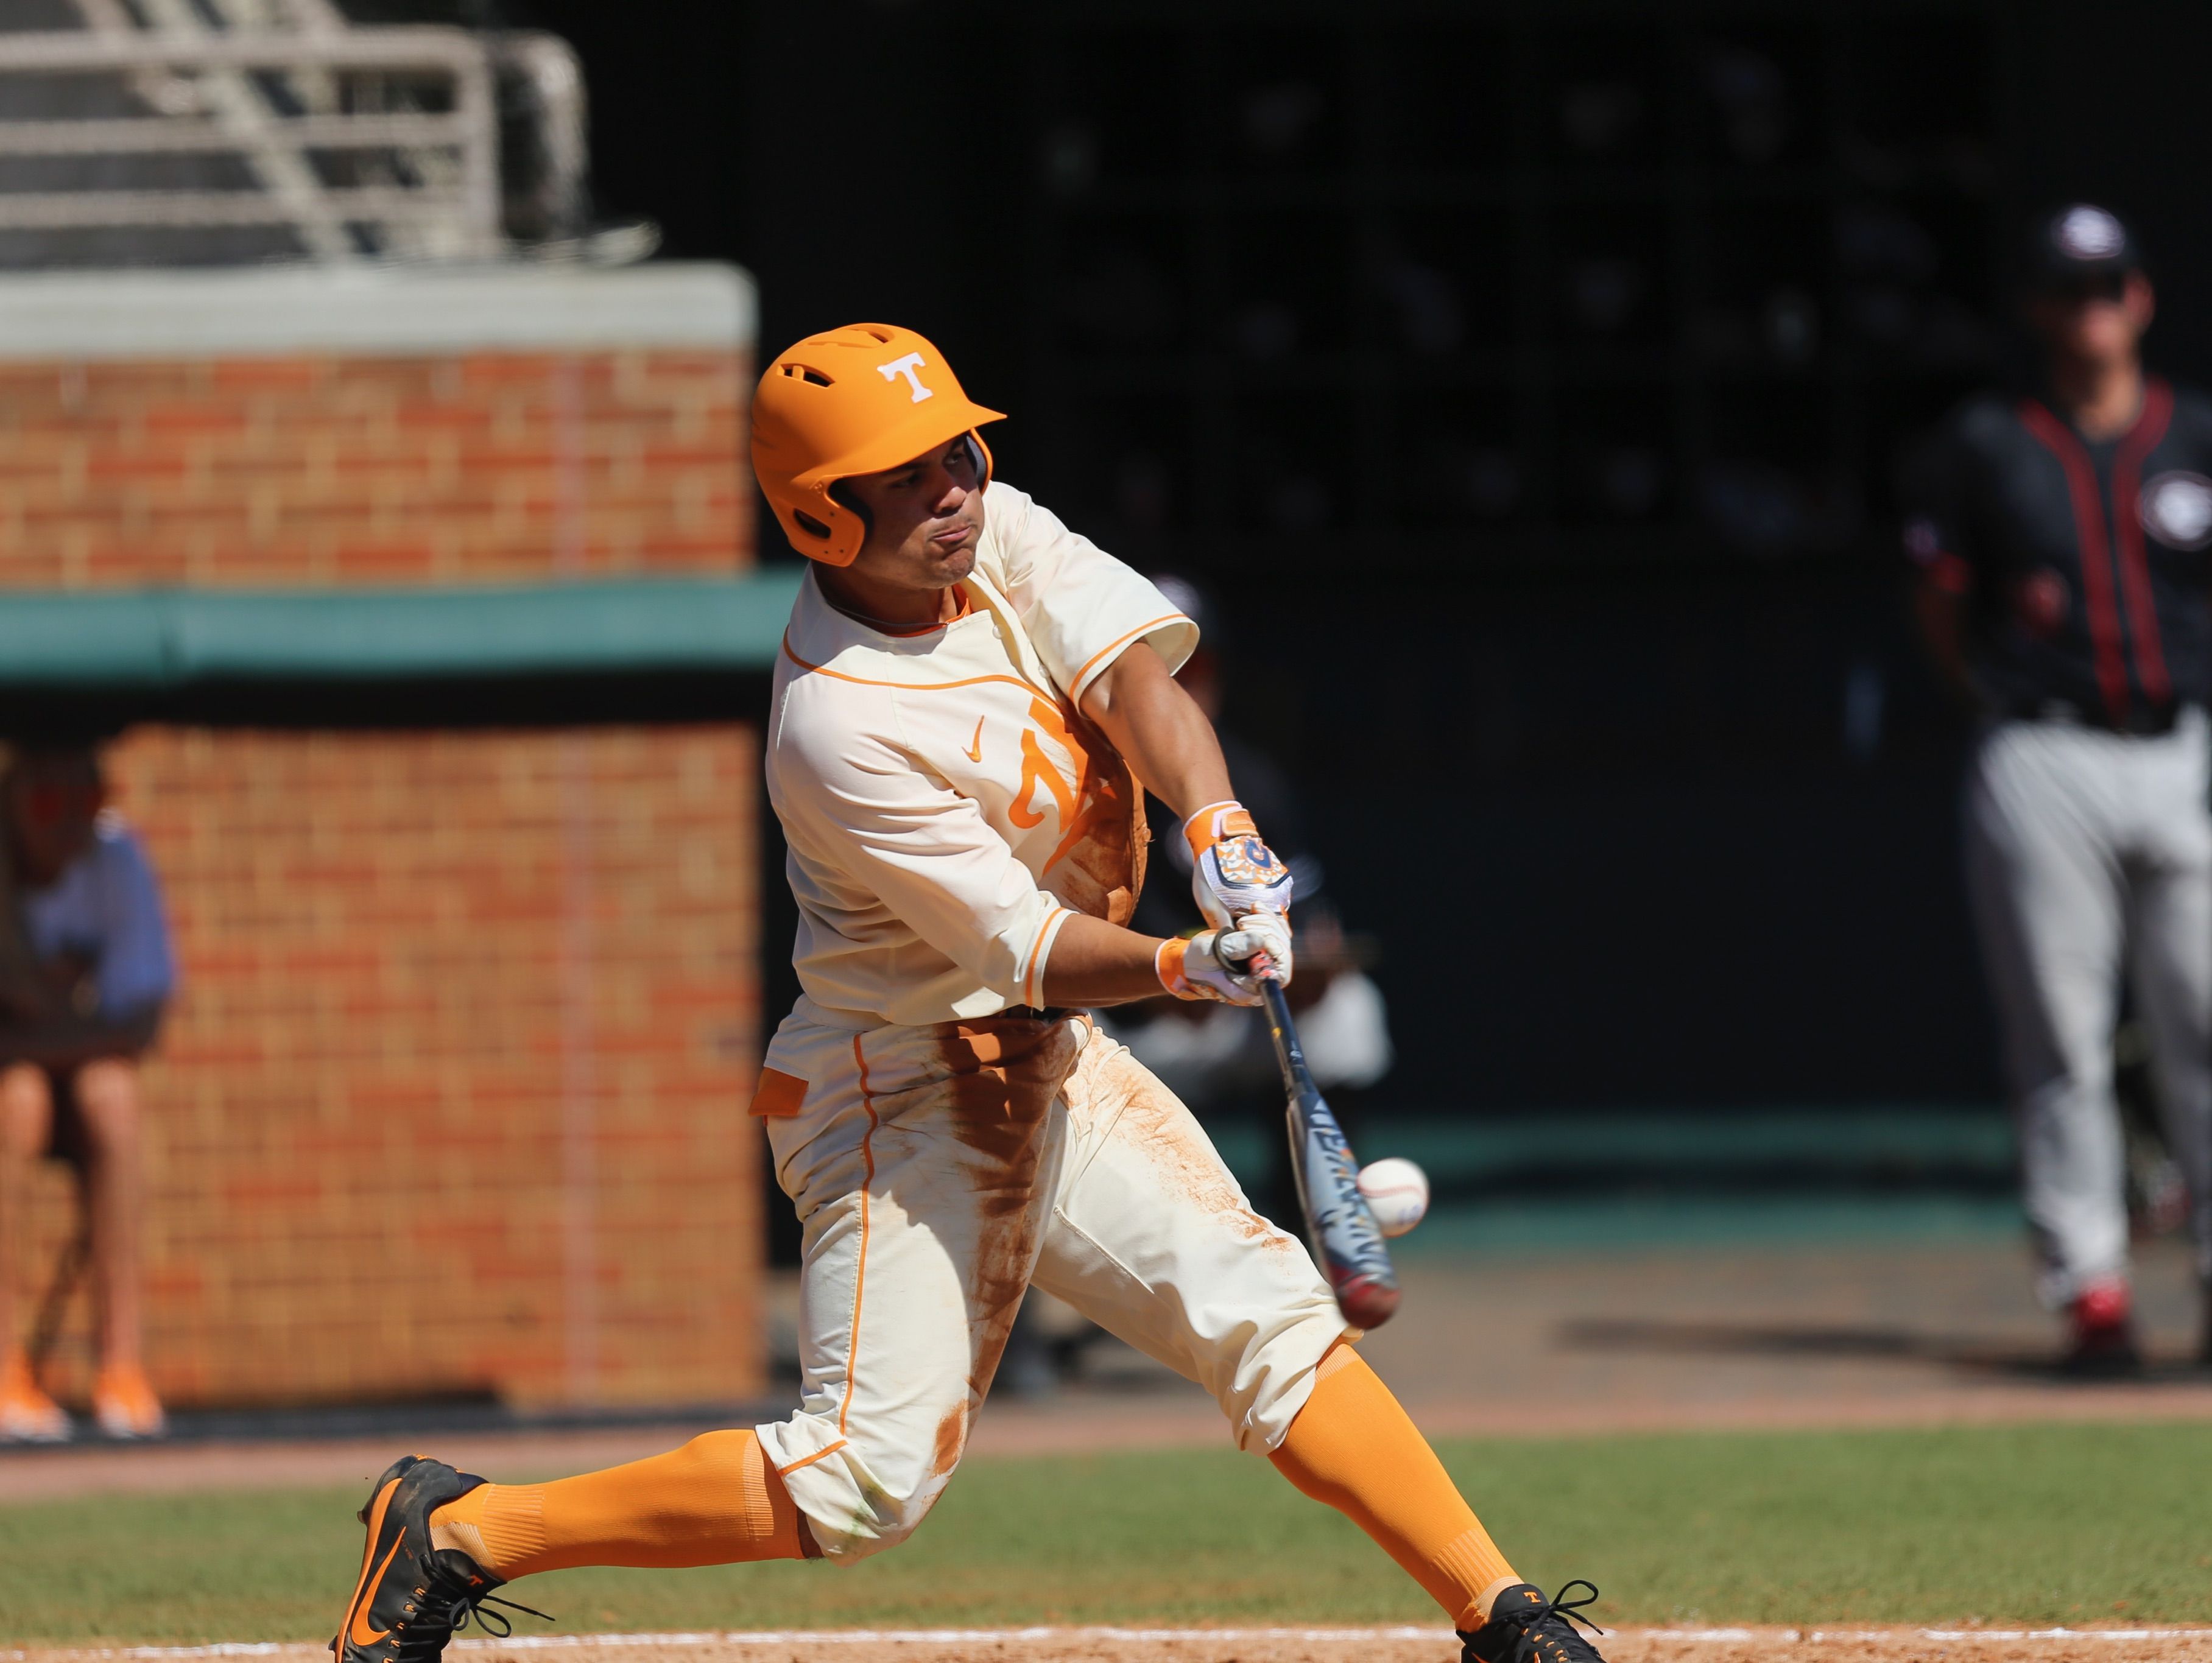 Thornton’s offense not enough as Vols baseball falls to 1-8 in SEC ...